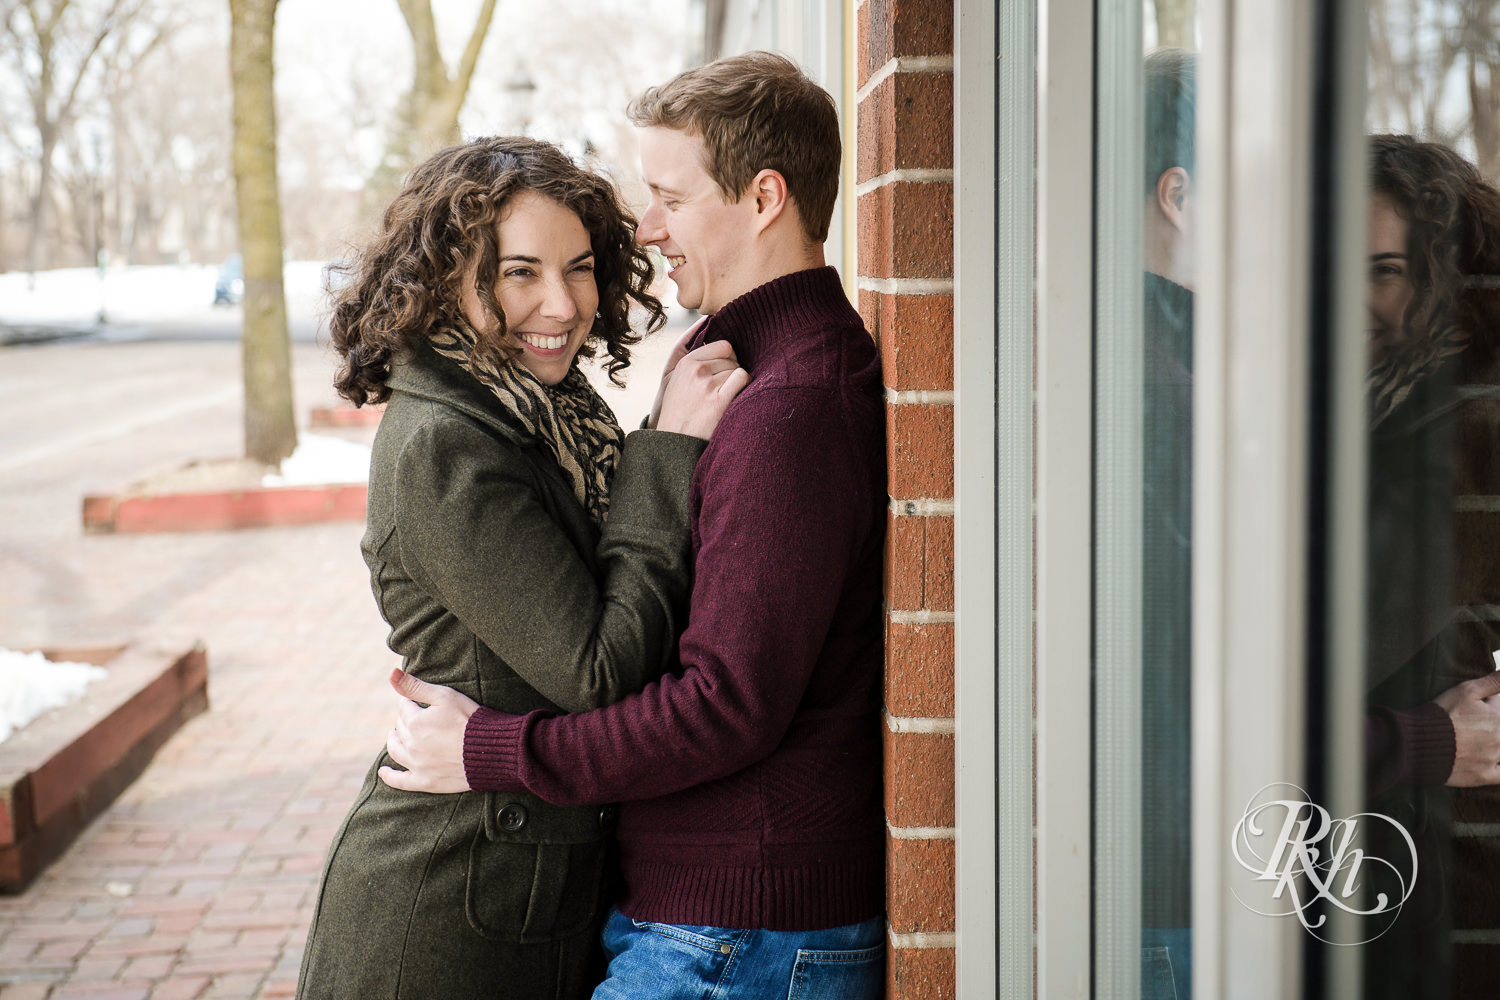 Man and woman smile during winter St. Anthony Main engagement photos in Minneapolis, Minnesota.